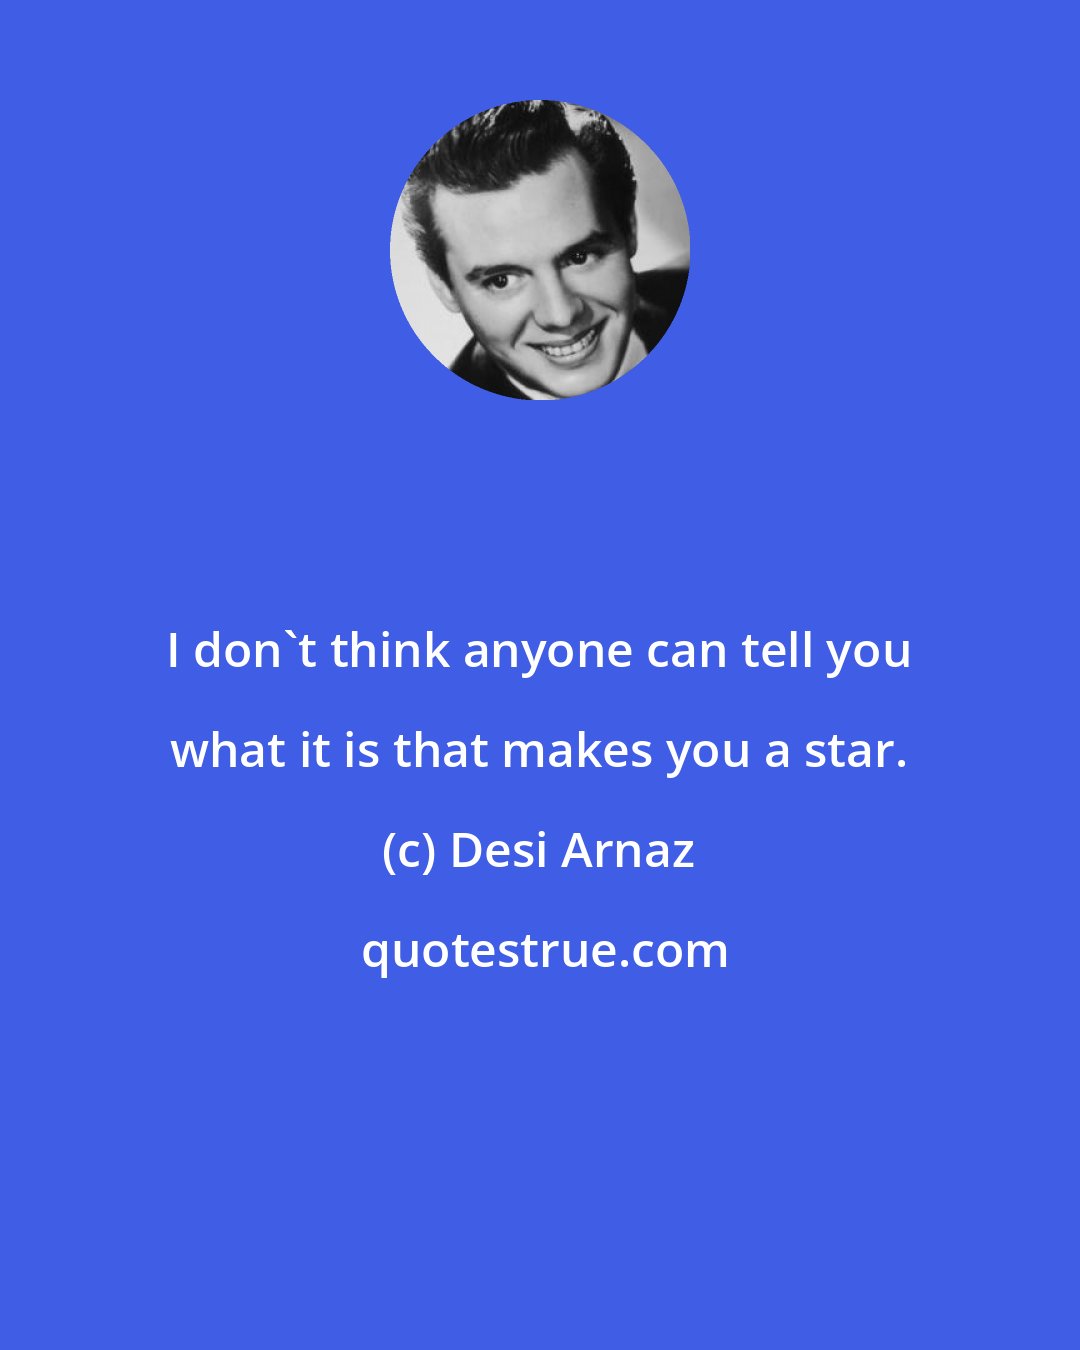 Desi Arnaz: I don't think anyone can tell you what it is that makes you a star.